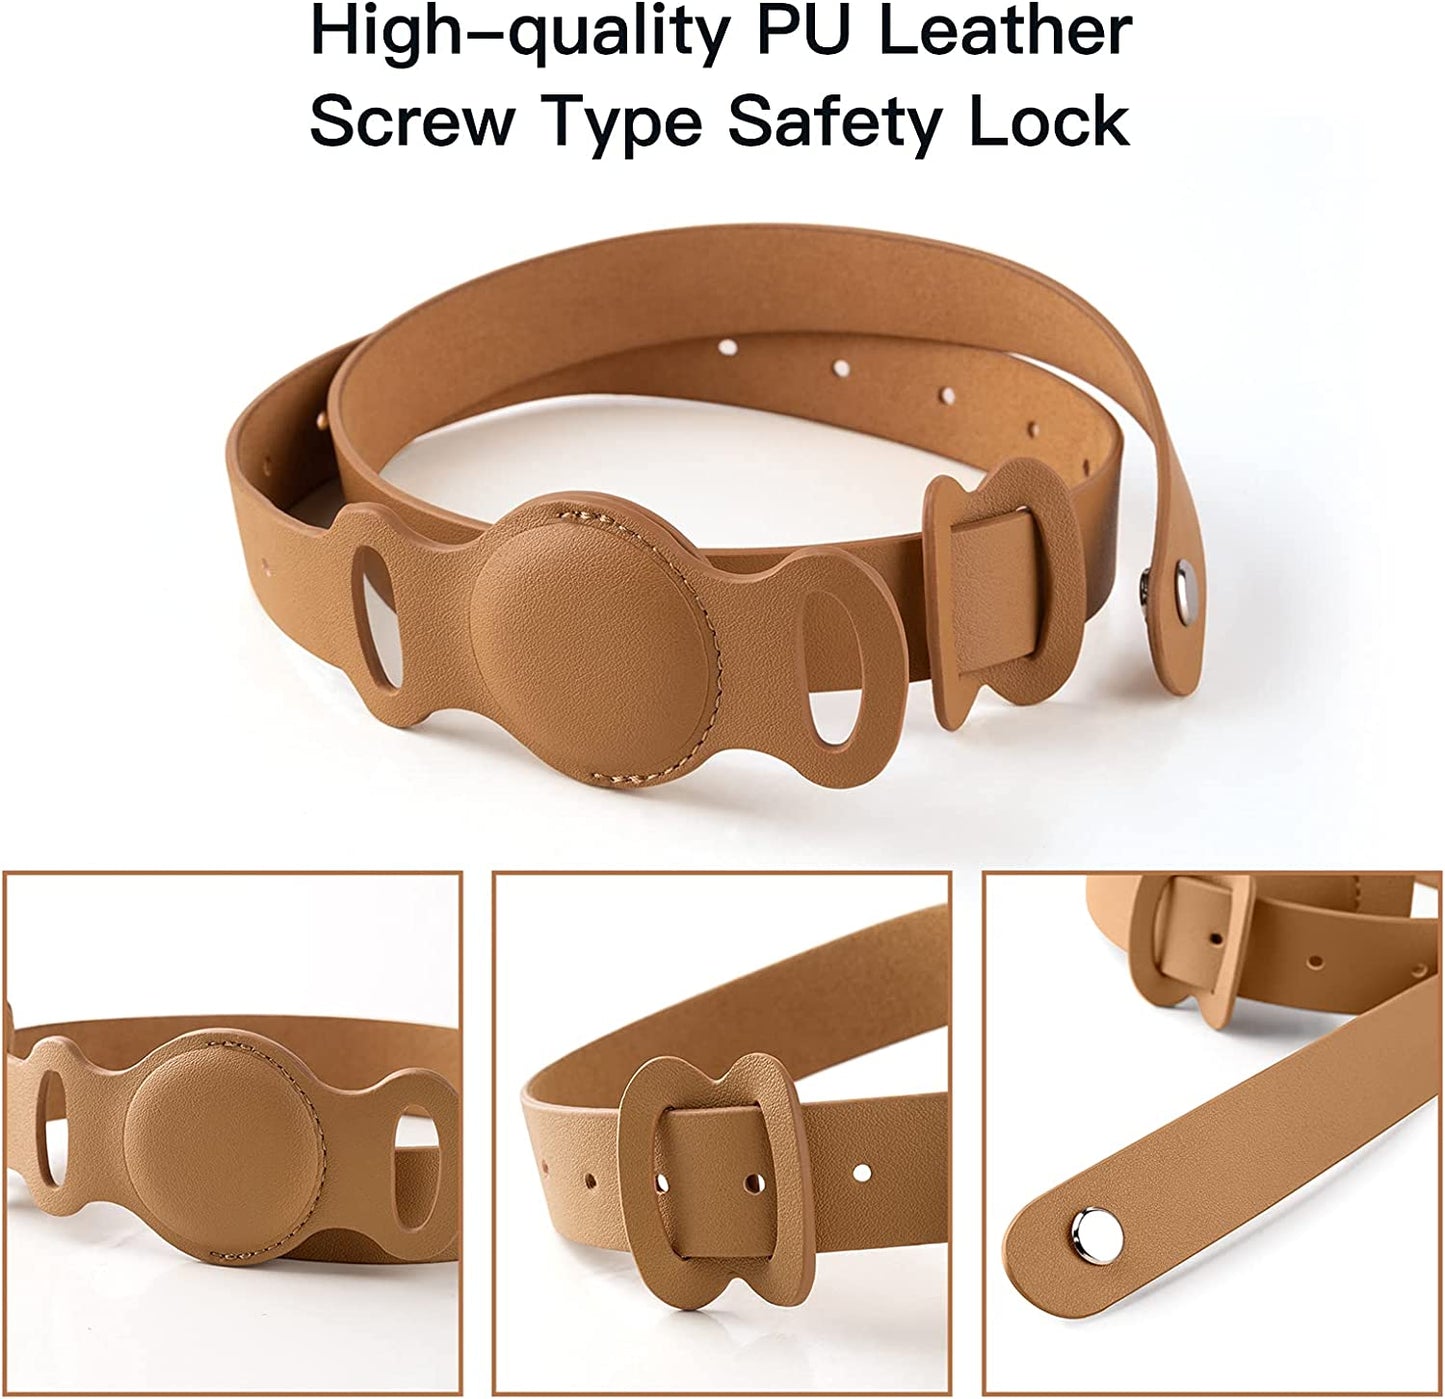 Leather Pet Collar Integrated with Apple Airtag Tracker Case Holder for Dog/Cat Personalized Accessories,Rugged Aesthetic Comfortable Strap with Anti-Lost Waterproof Protective Cover (Brown, S/400Mm)